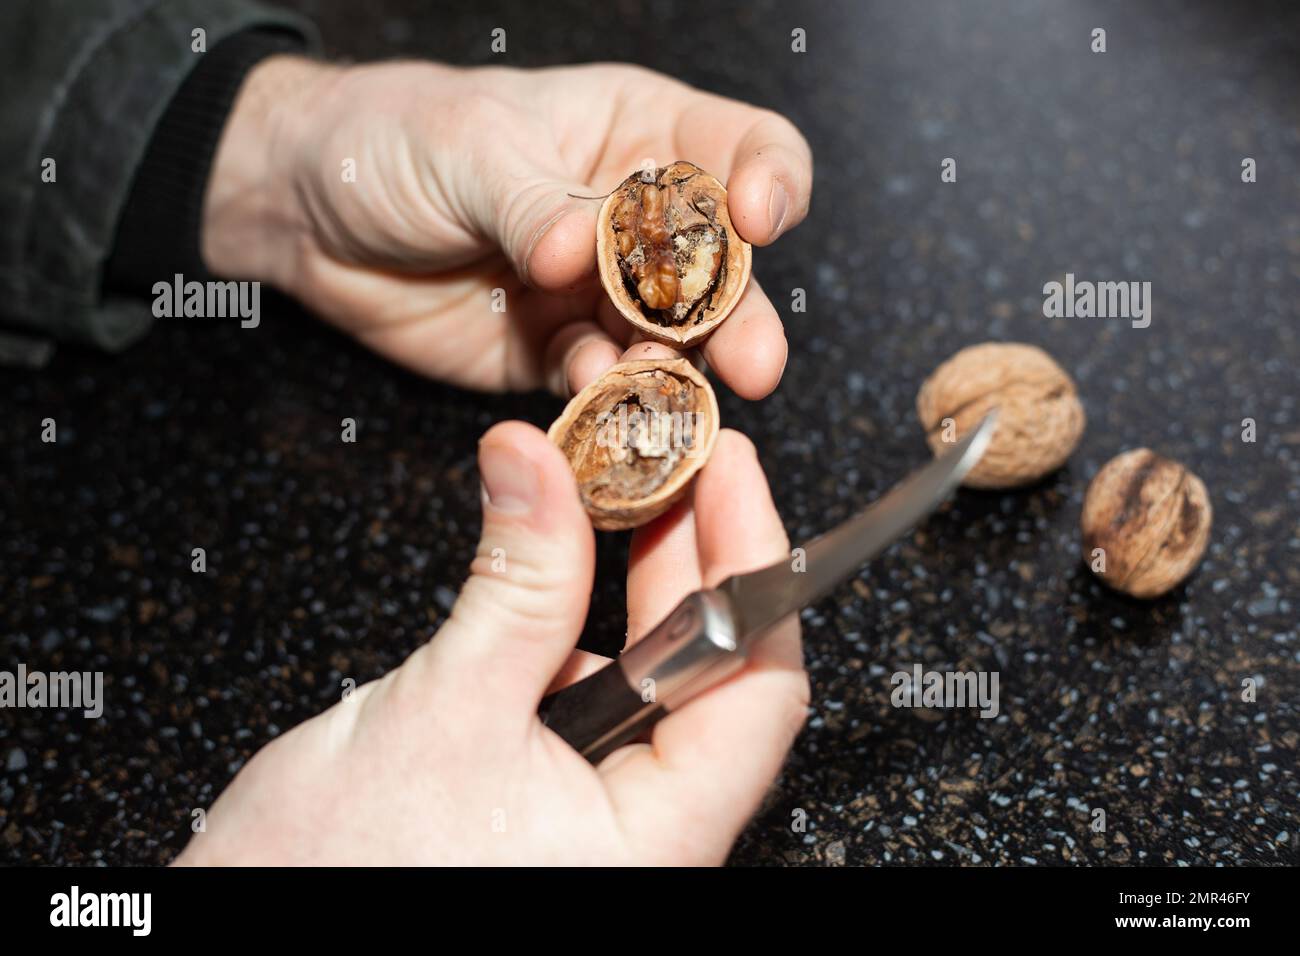 A man peeled a walnut that was spoiled. Infestation of the fruit by the walnut moth. Stock Photo